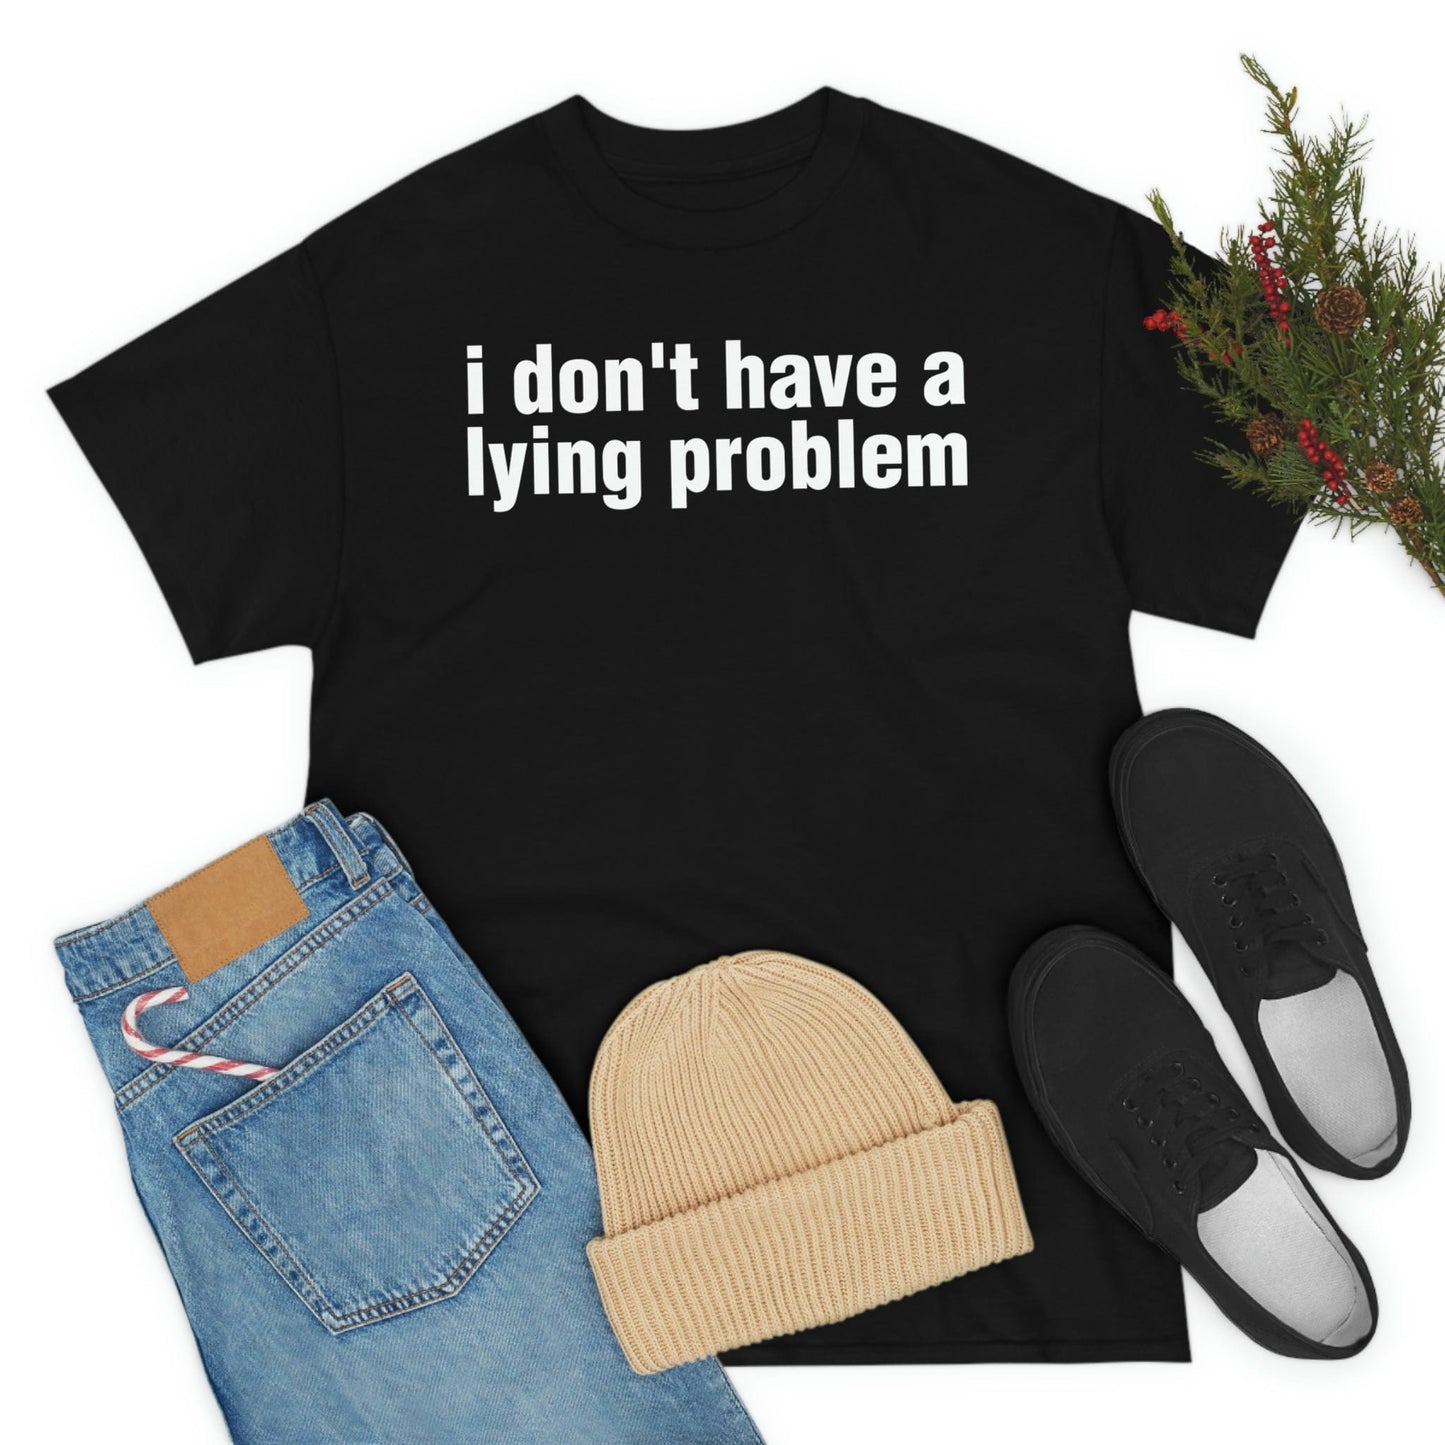 i don't have a lying problem